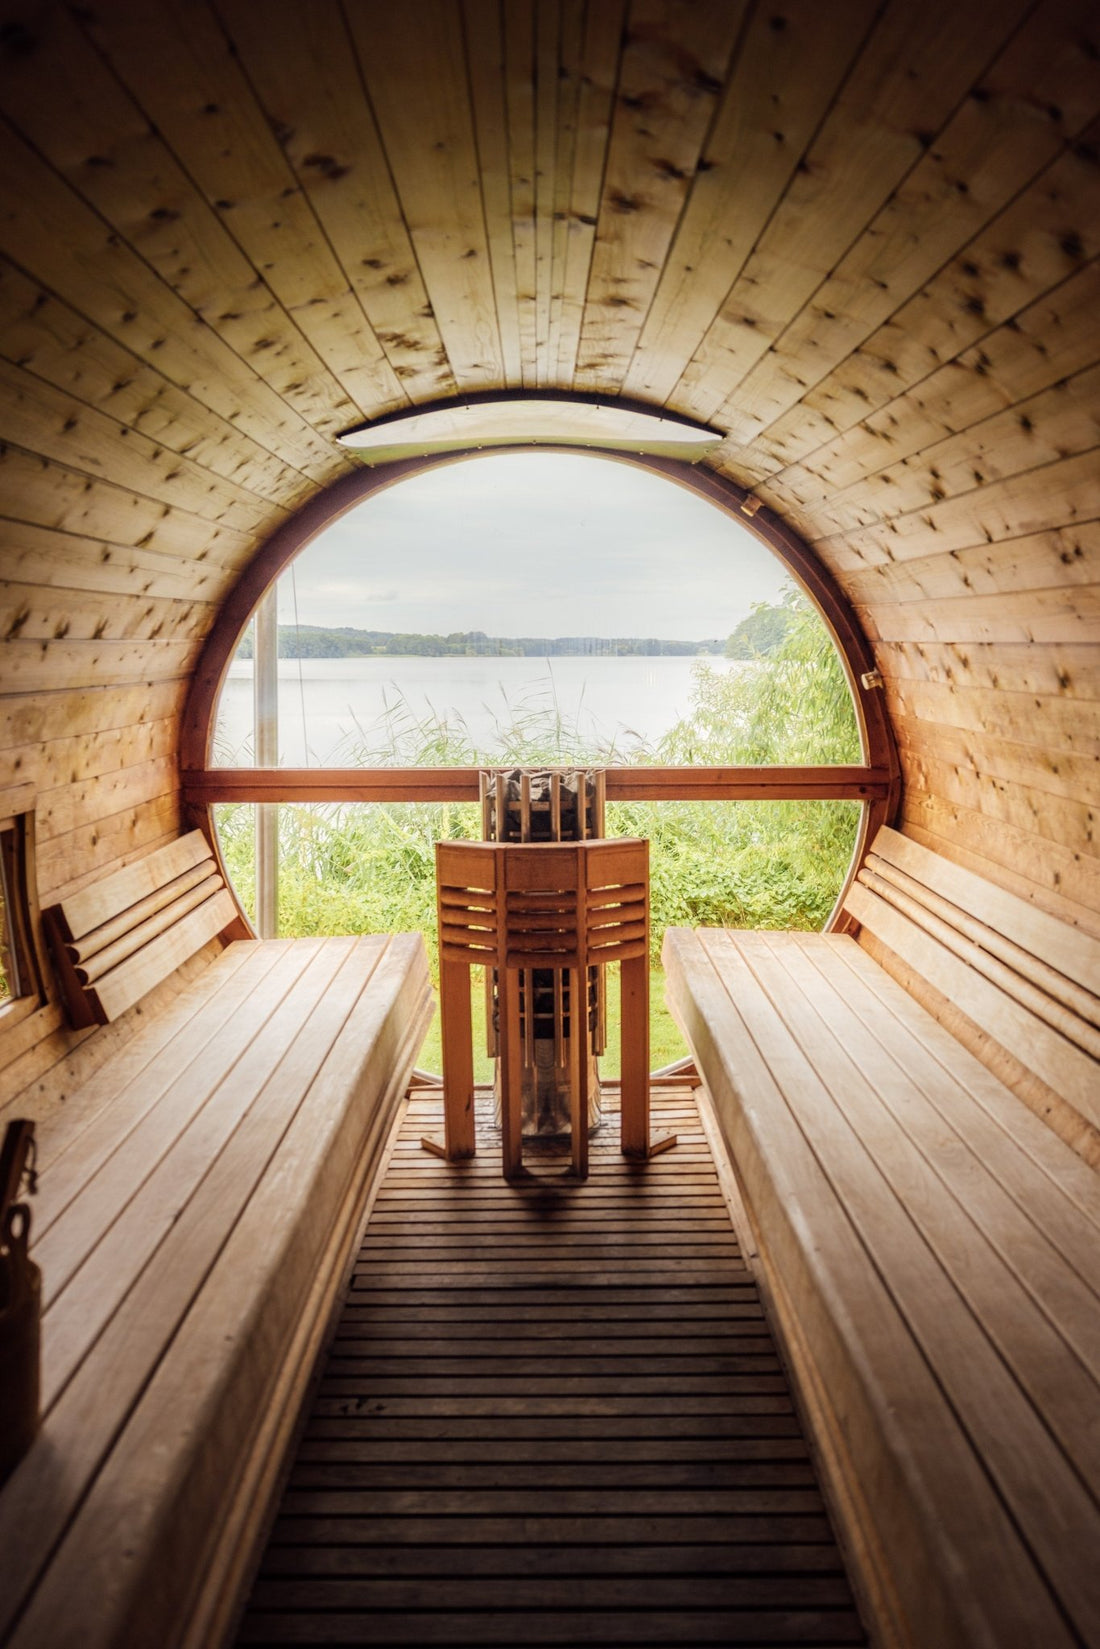 HOW TO GET RID OF BAD SMELL IN A SAUNA - ALTAR SAUNA